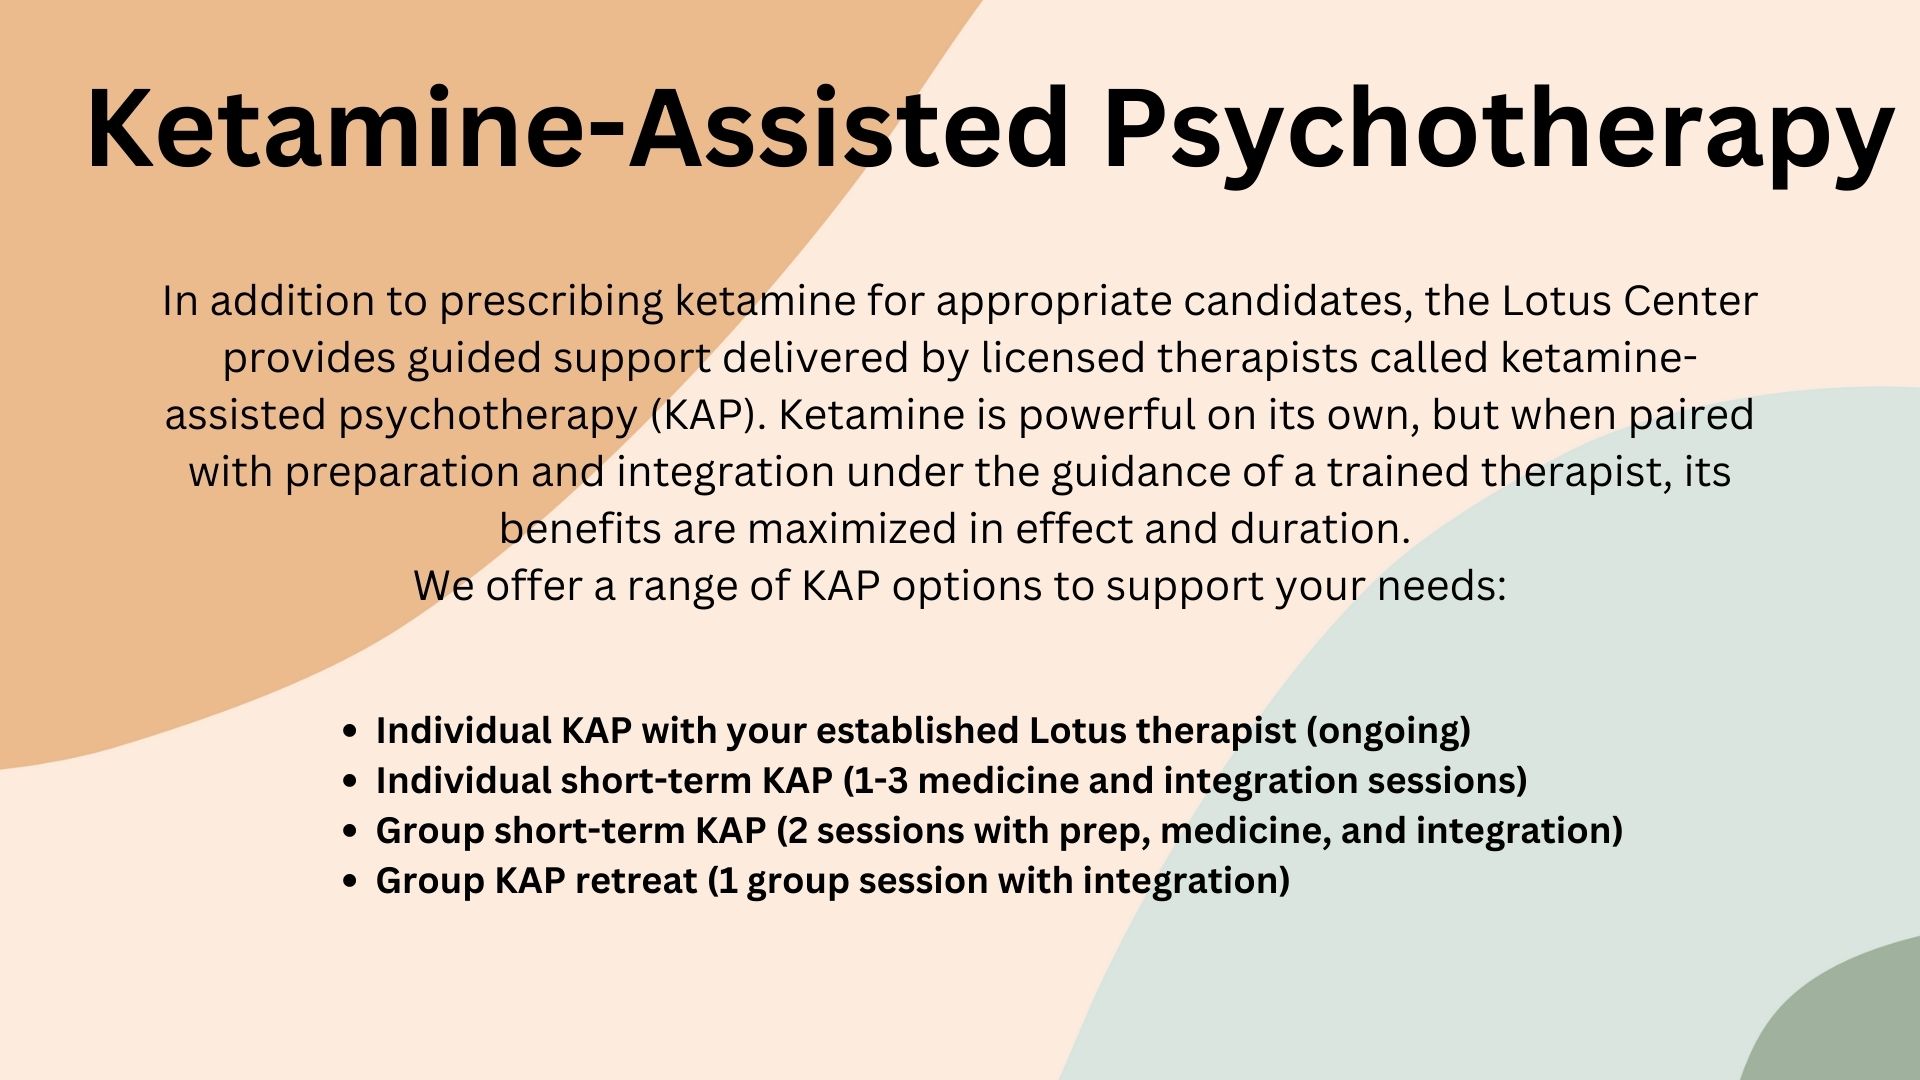 Ketamine-Assisted Psychotherapy